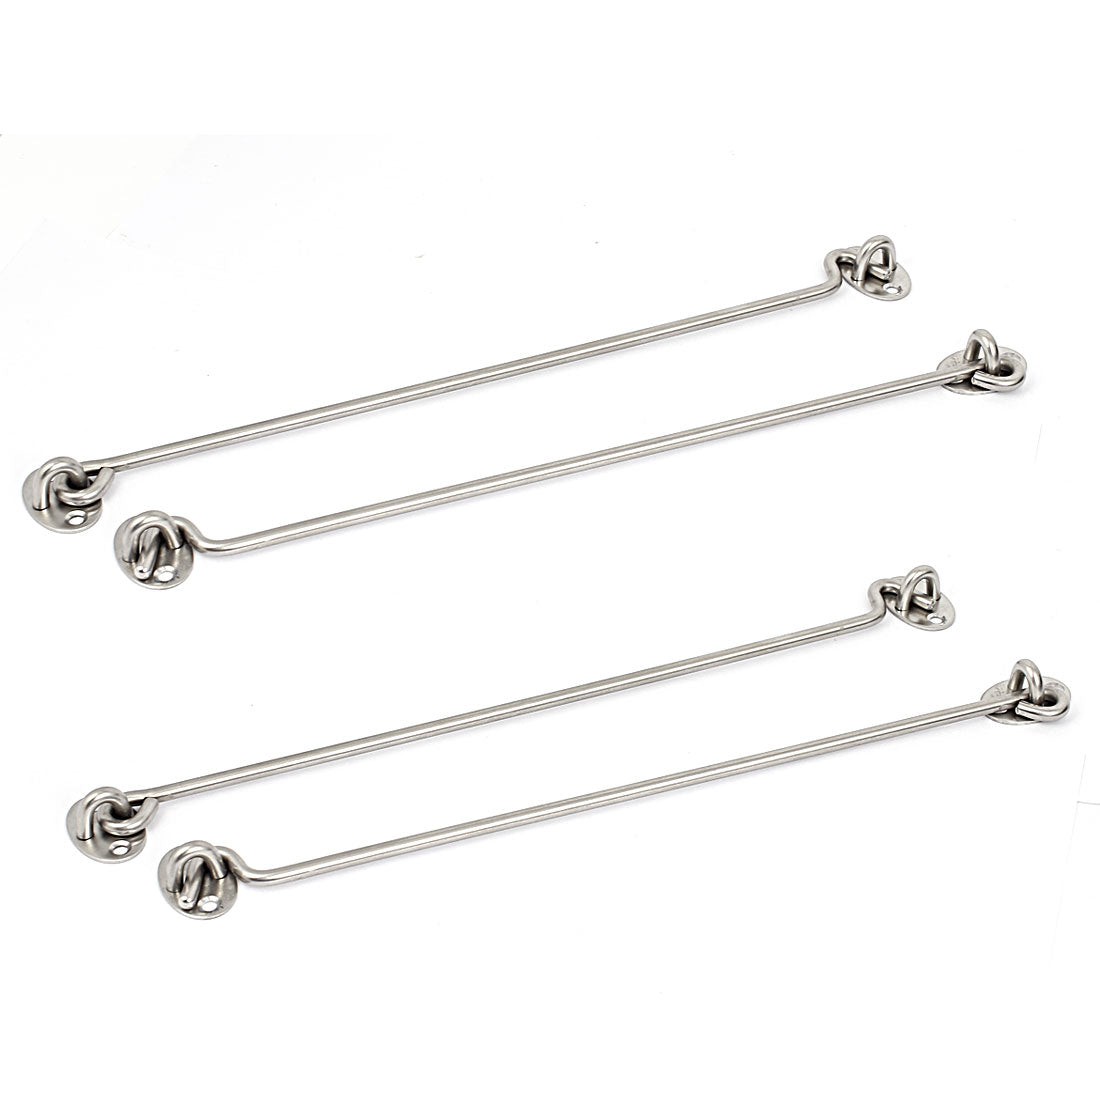 uxcell Uxcell 350mm 14" Long Stainless Steel Cabin Hook Eye Catch Shed Gate Door Latch 4pcs